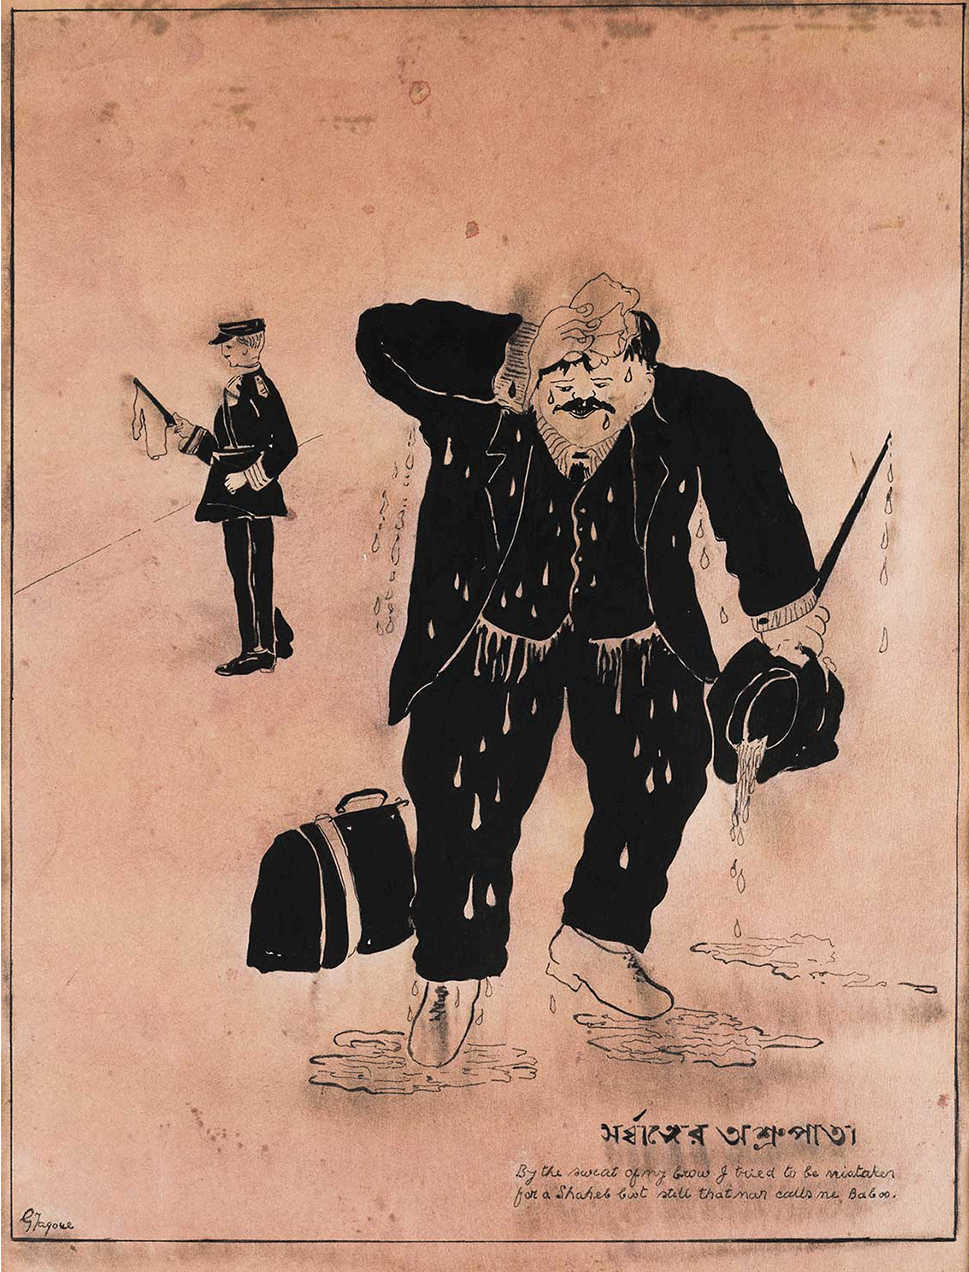 A man in a suit, dripping in sweat, pats his forehead with a handkerchief. In his other hand he carries a cane, and a hat from which sweat seems to be pouring out. His sweat is pooling in puddles on the ground. Next to him is a duffel bag and in the background is a policeman. At the bottom right of the picture is text in Bengali which reads “Sarbanger Ashrupaat”. Written in English below this is, “By the sweat of my brow I tried to be mistaken for a Saheb but still that man calls me Baboo.”